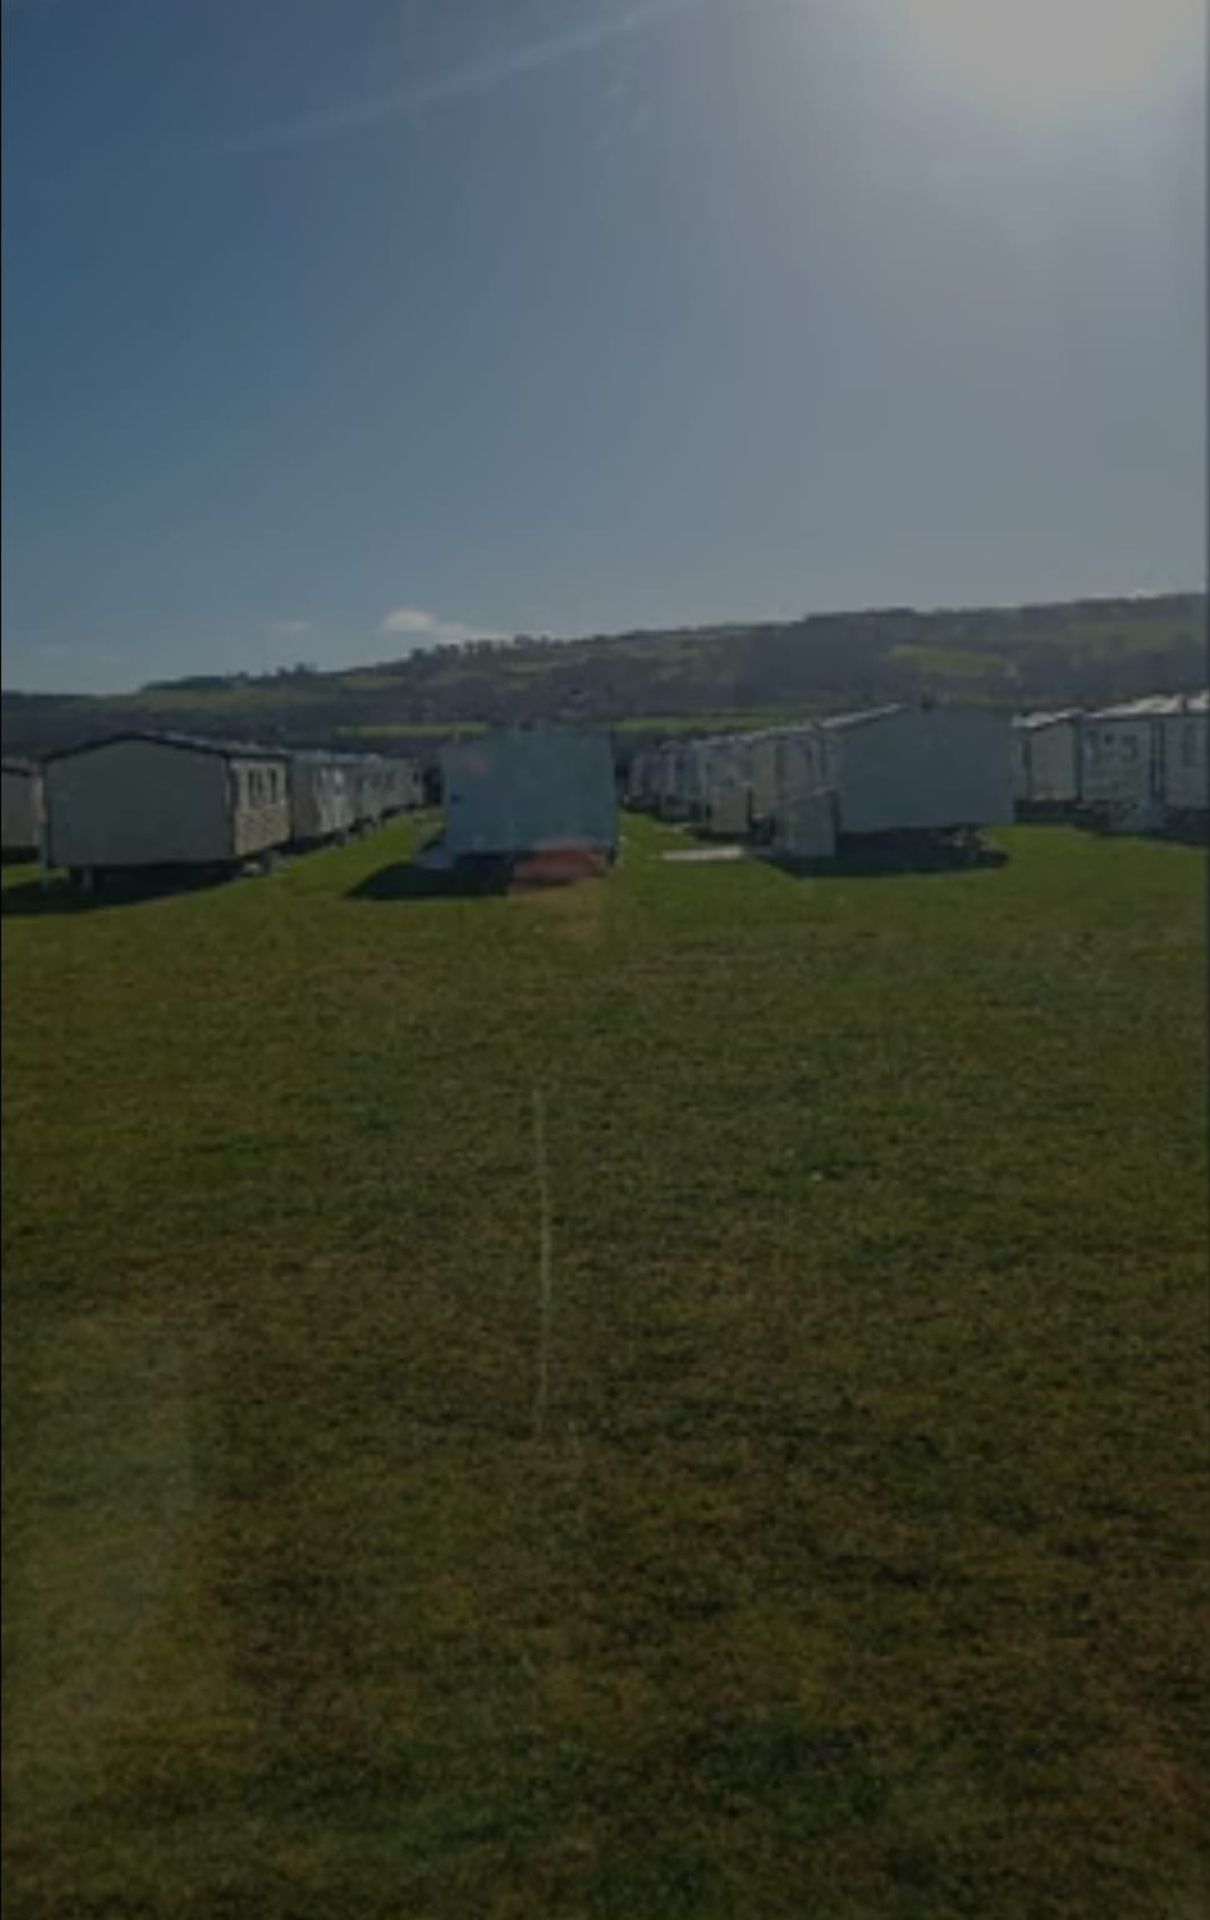 2015 WILLERBY ECO SALSA 3 BEDROOM holiday home ON-SITE SALE. LAST CHANCE!!! **RESERVE REDUCED** - Image 7 of 13